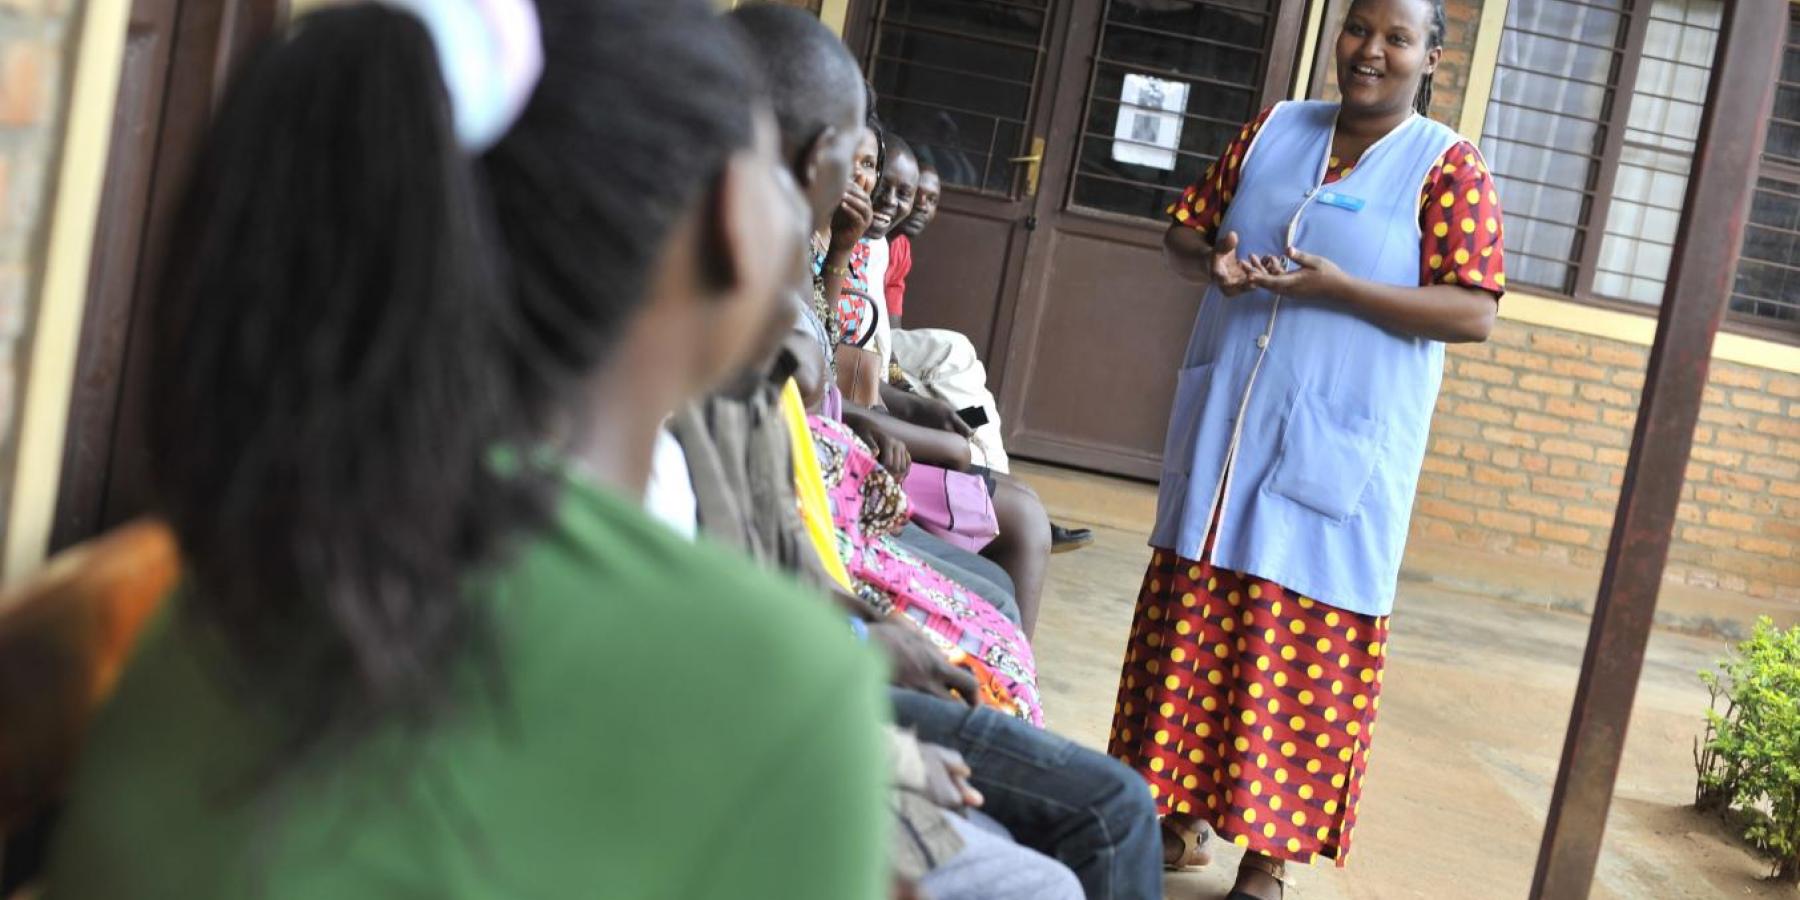 A health worker speaks to clients waiting for services at a clinic in Rwanda.